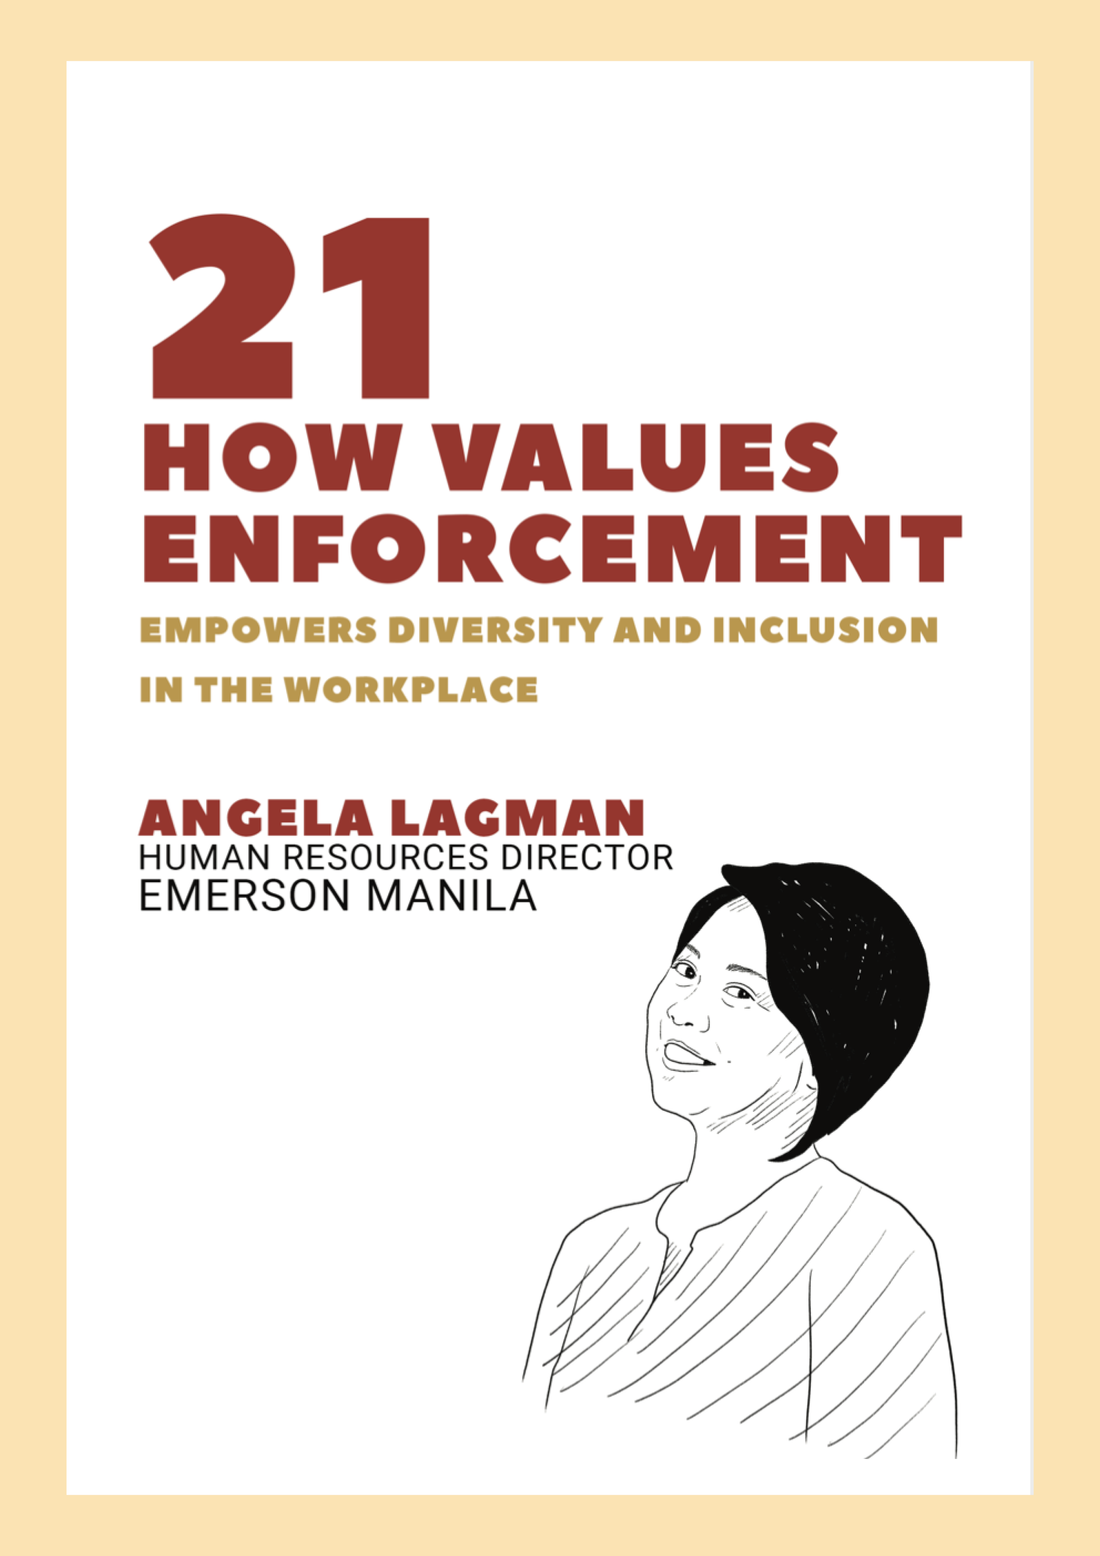 How Values Enforcement Empowers Diversity and Inclusion in the Workplace